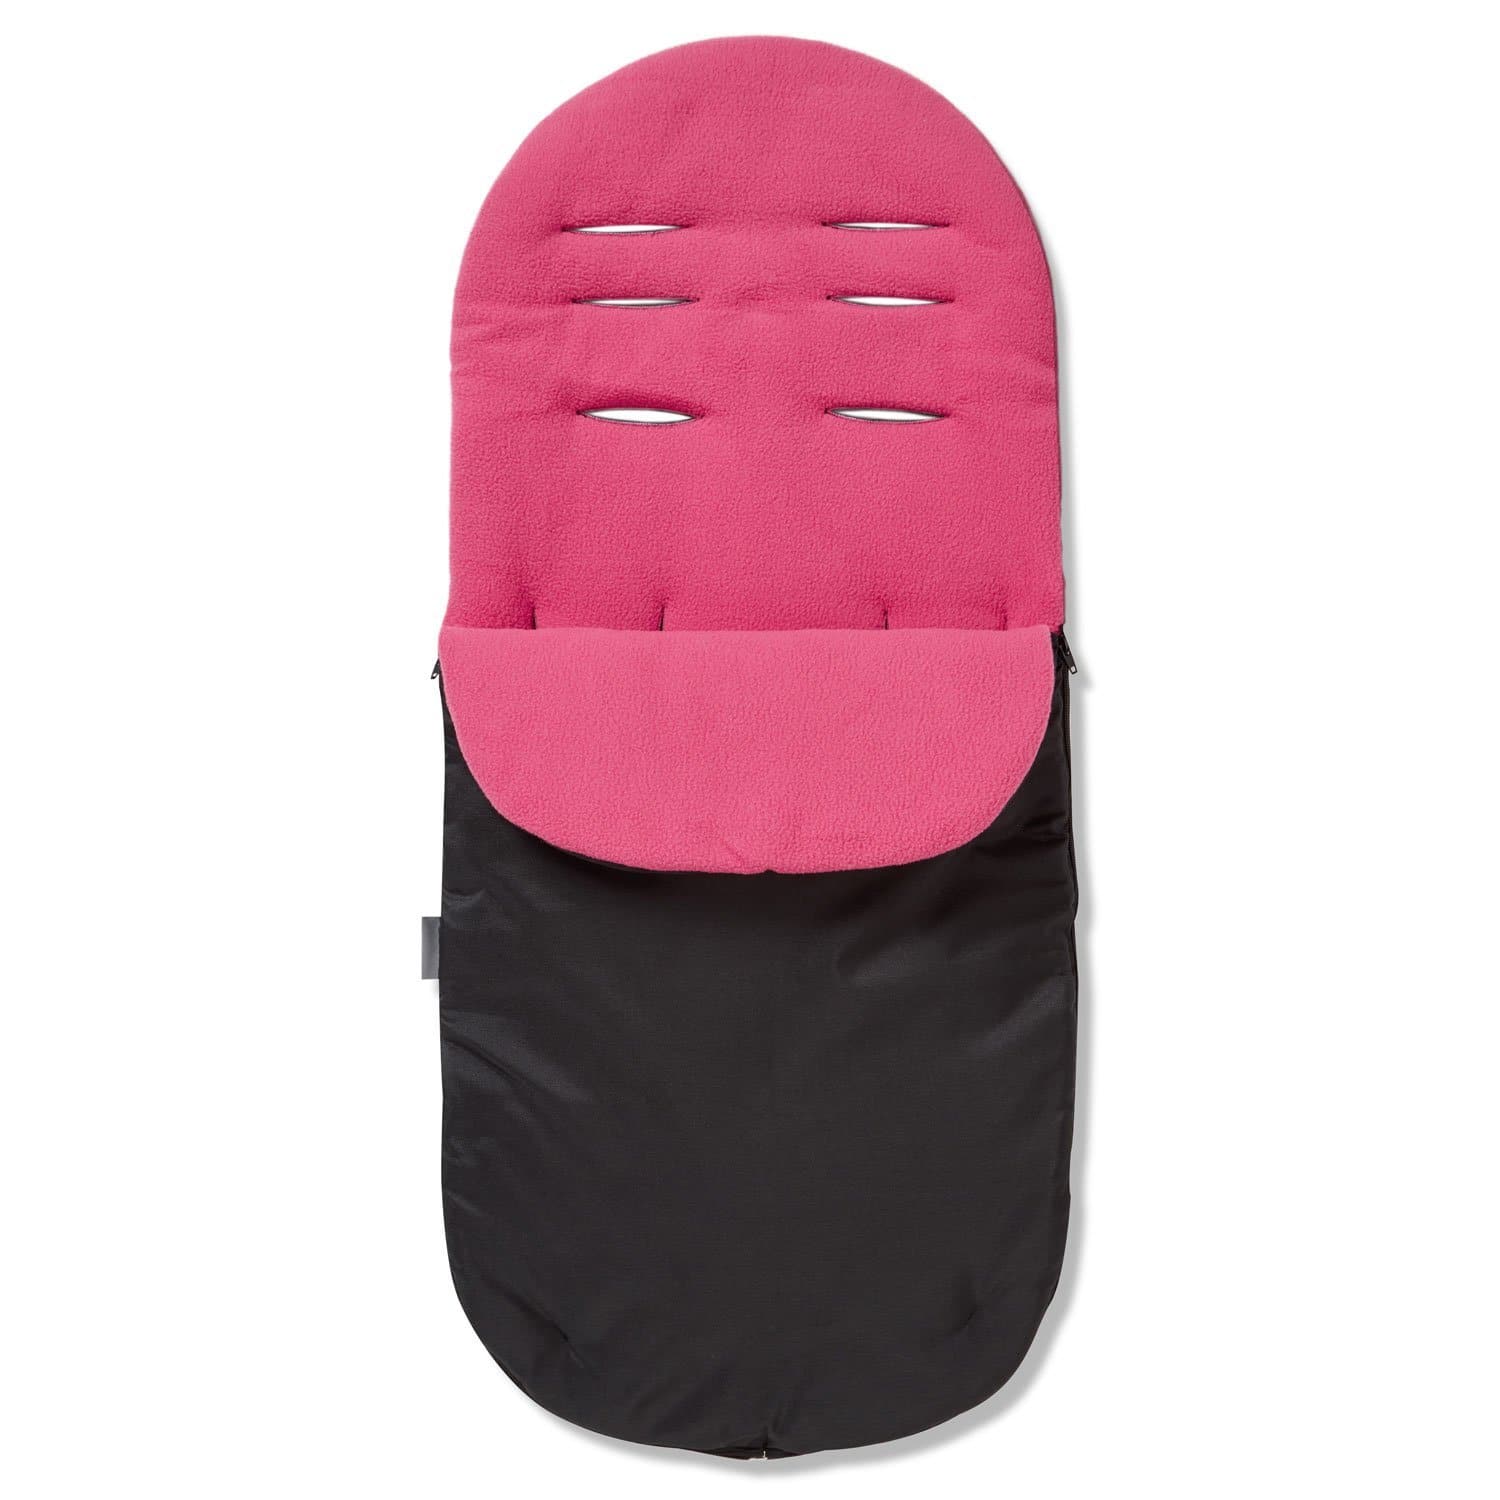 Footmuff / Cosy Toes Compatible with Baby Weavers - Dark Pink / Fits All Models | For Your Little One